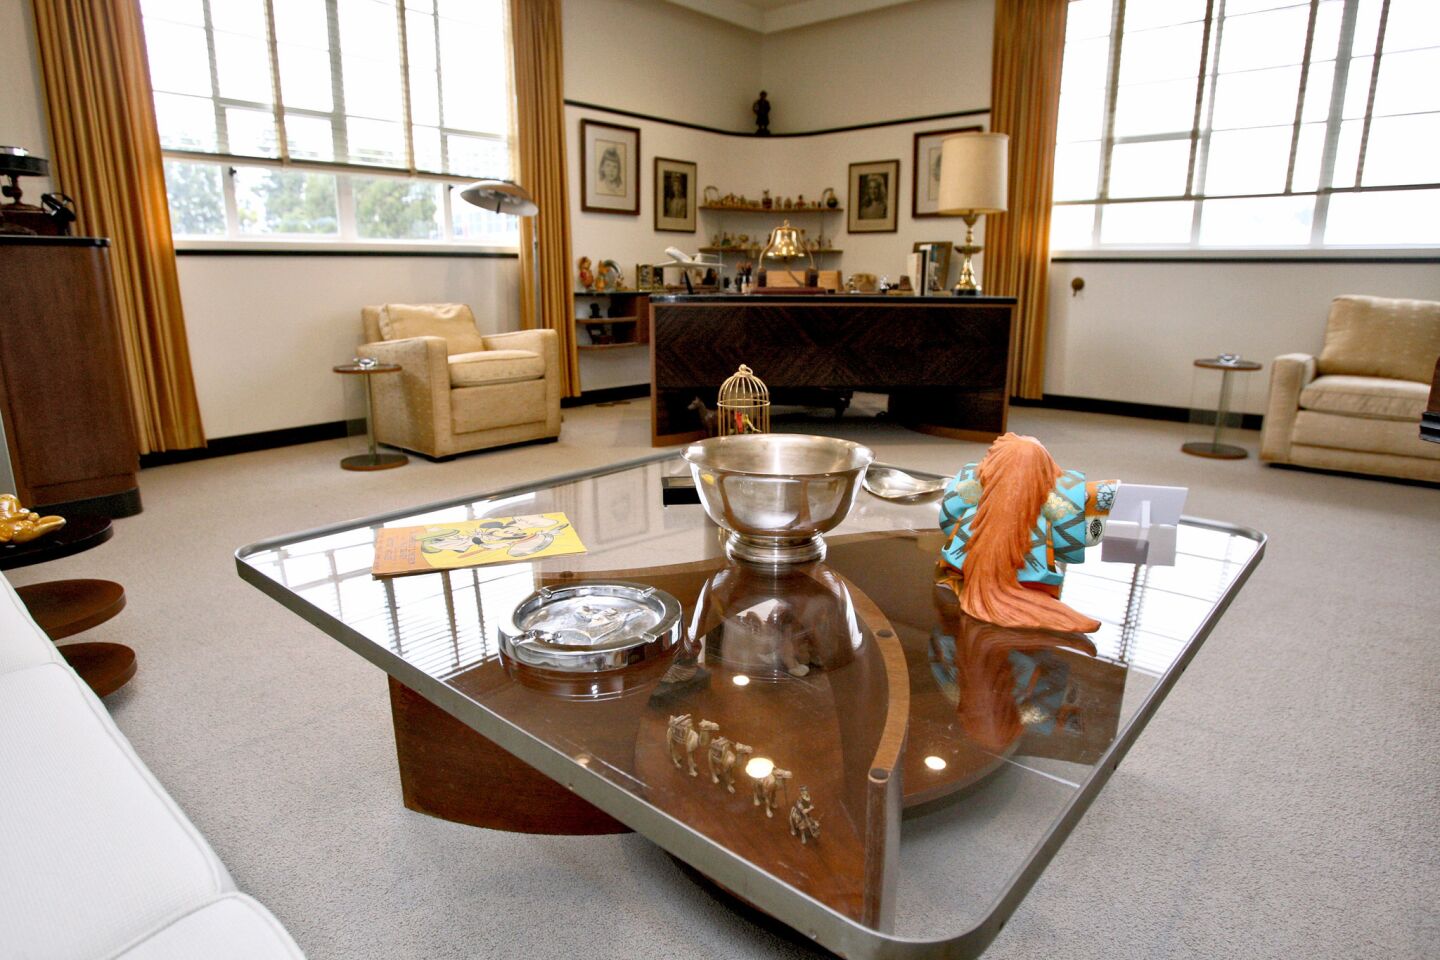 To celebrate the 75th anniversary of the Walt Disney Studios in Burbank, the Walt Disney Archives restored Walt Disney's original office suite, which was shown to members of the media on Tuesday, December 22, 2015. Above, another view of Walt Disney's main office. The space is located in the original Animation building and was occupied by Walt Disney from 1940 to 1966, when he passed away at the age of 65 from lung cancer. The permanent exhibit will be opened to Disney employees, cast members and studio visitors and it will be added to tours of the studio lot that gold members of the official fan club, D23, can take.